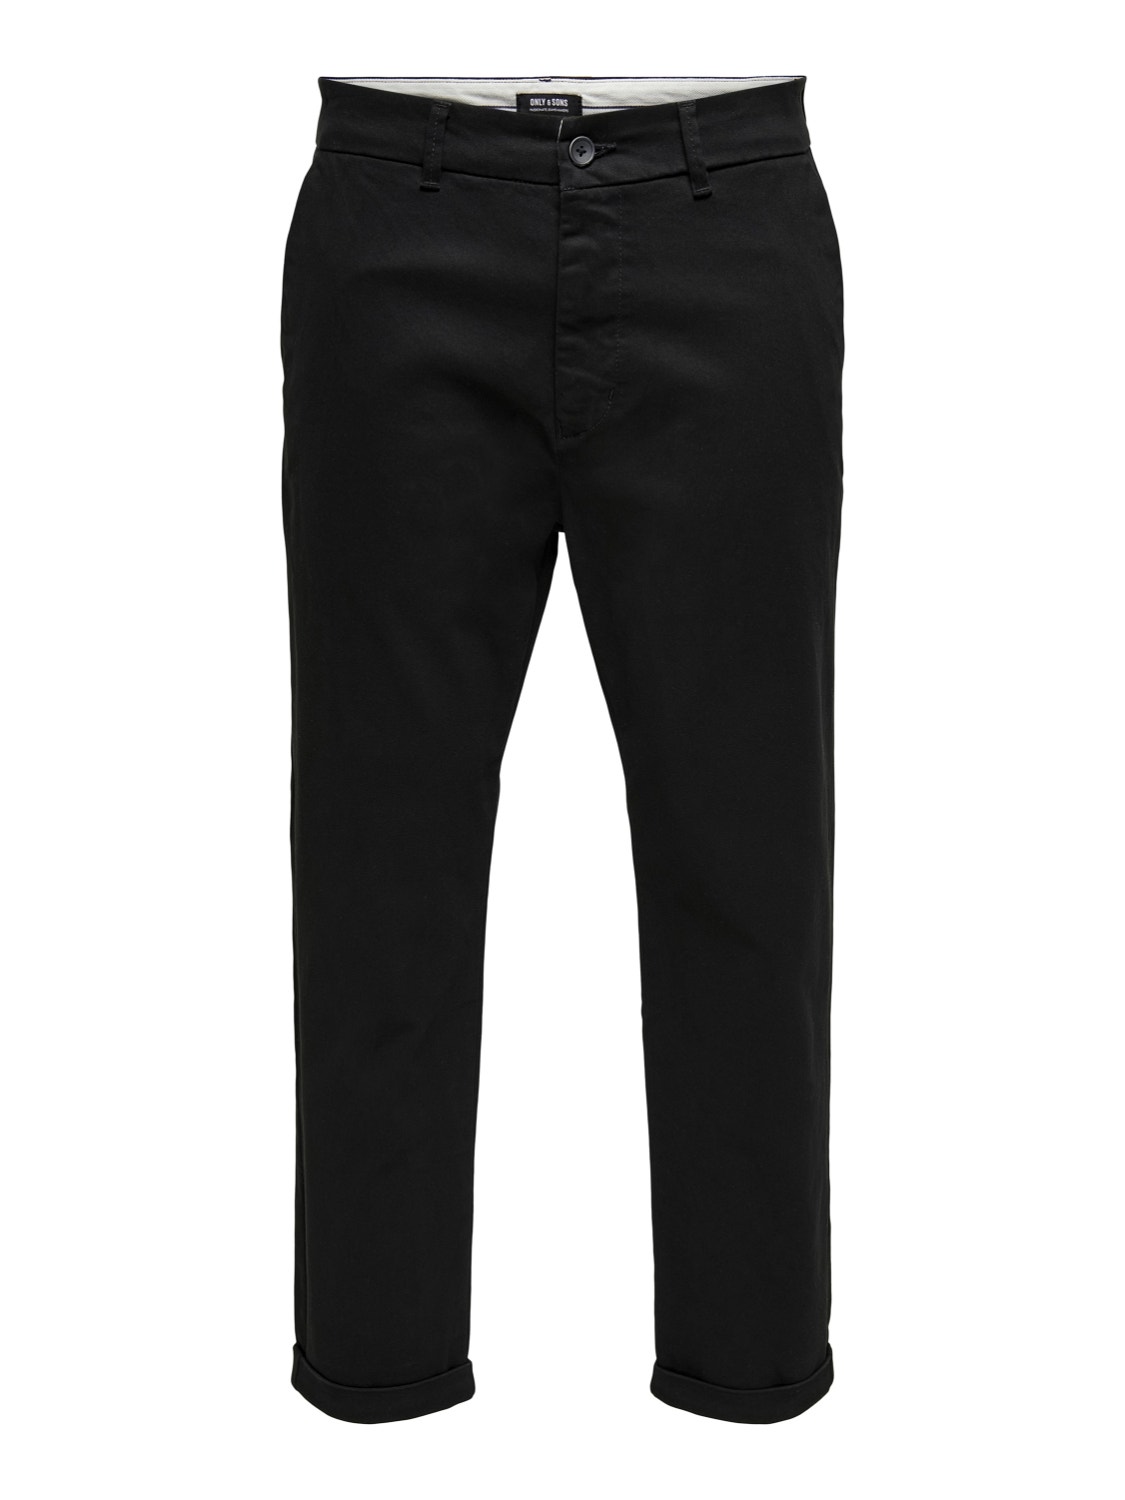 ONLY & SONS Regular Fit Chinos -Black - 22020400